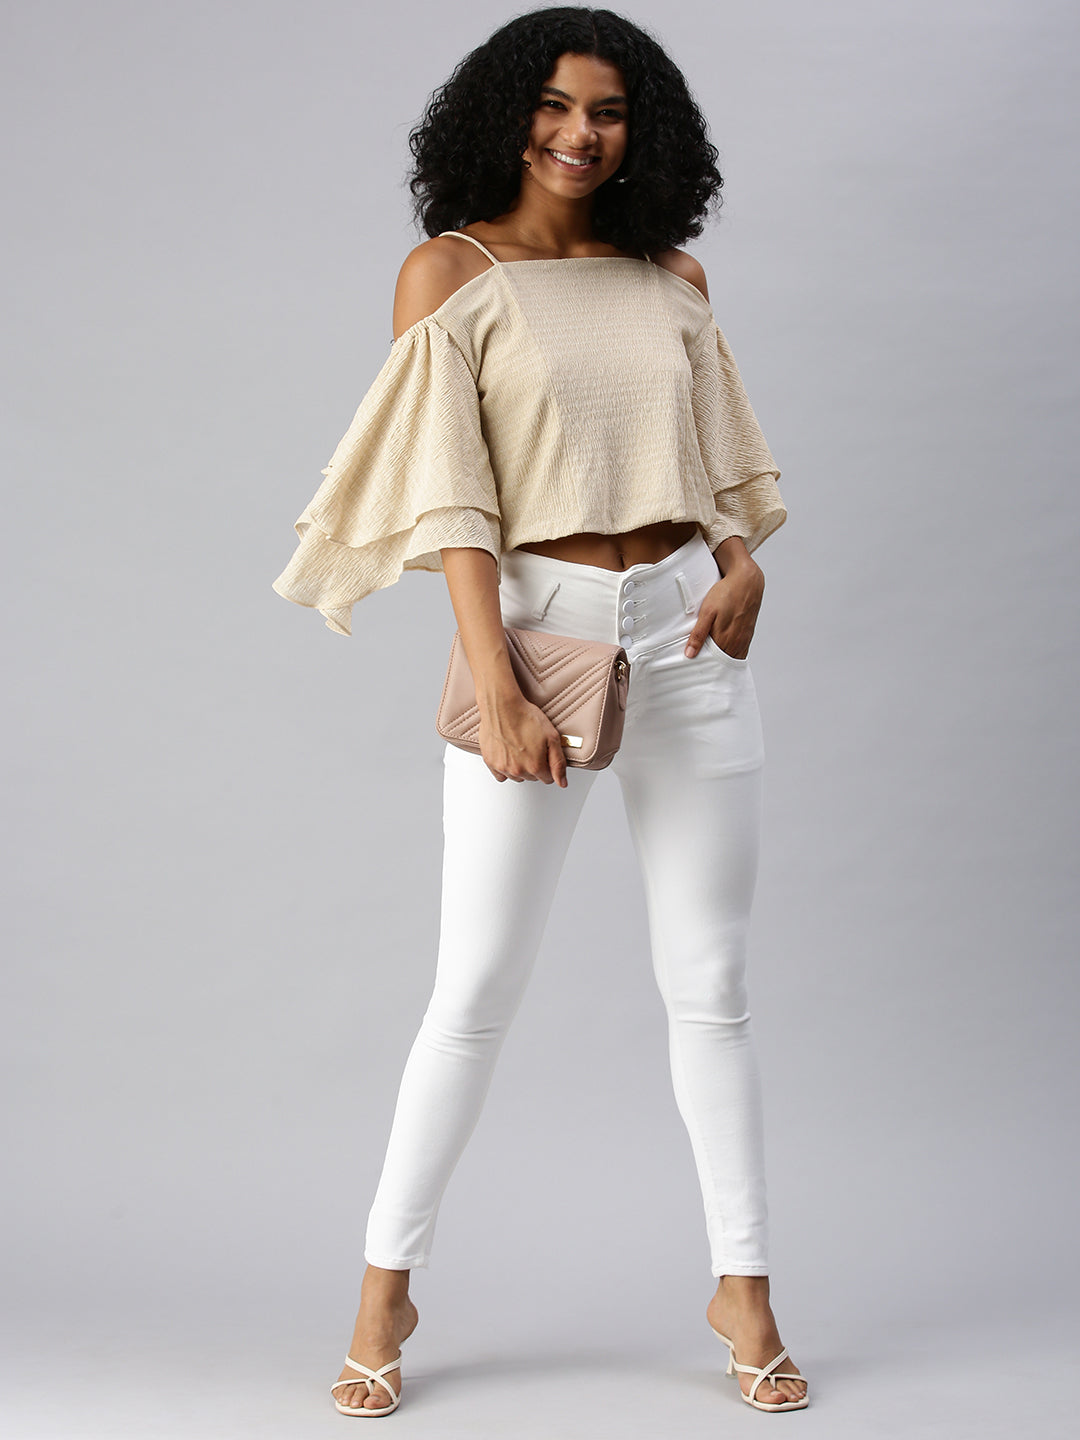 Women's Champagne Solid Top